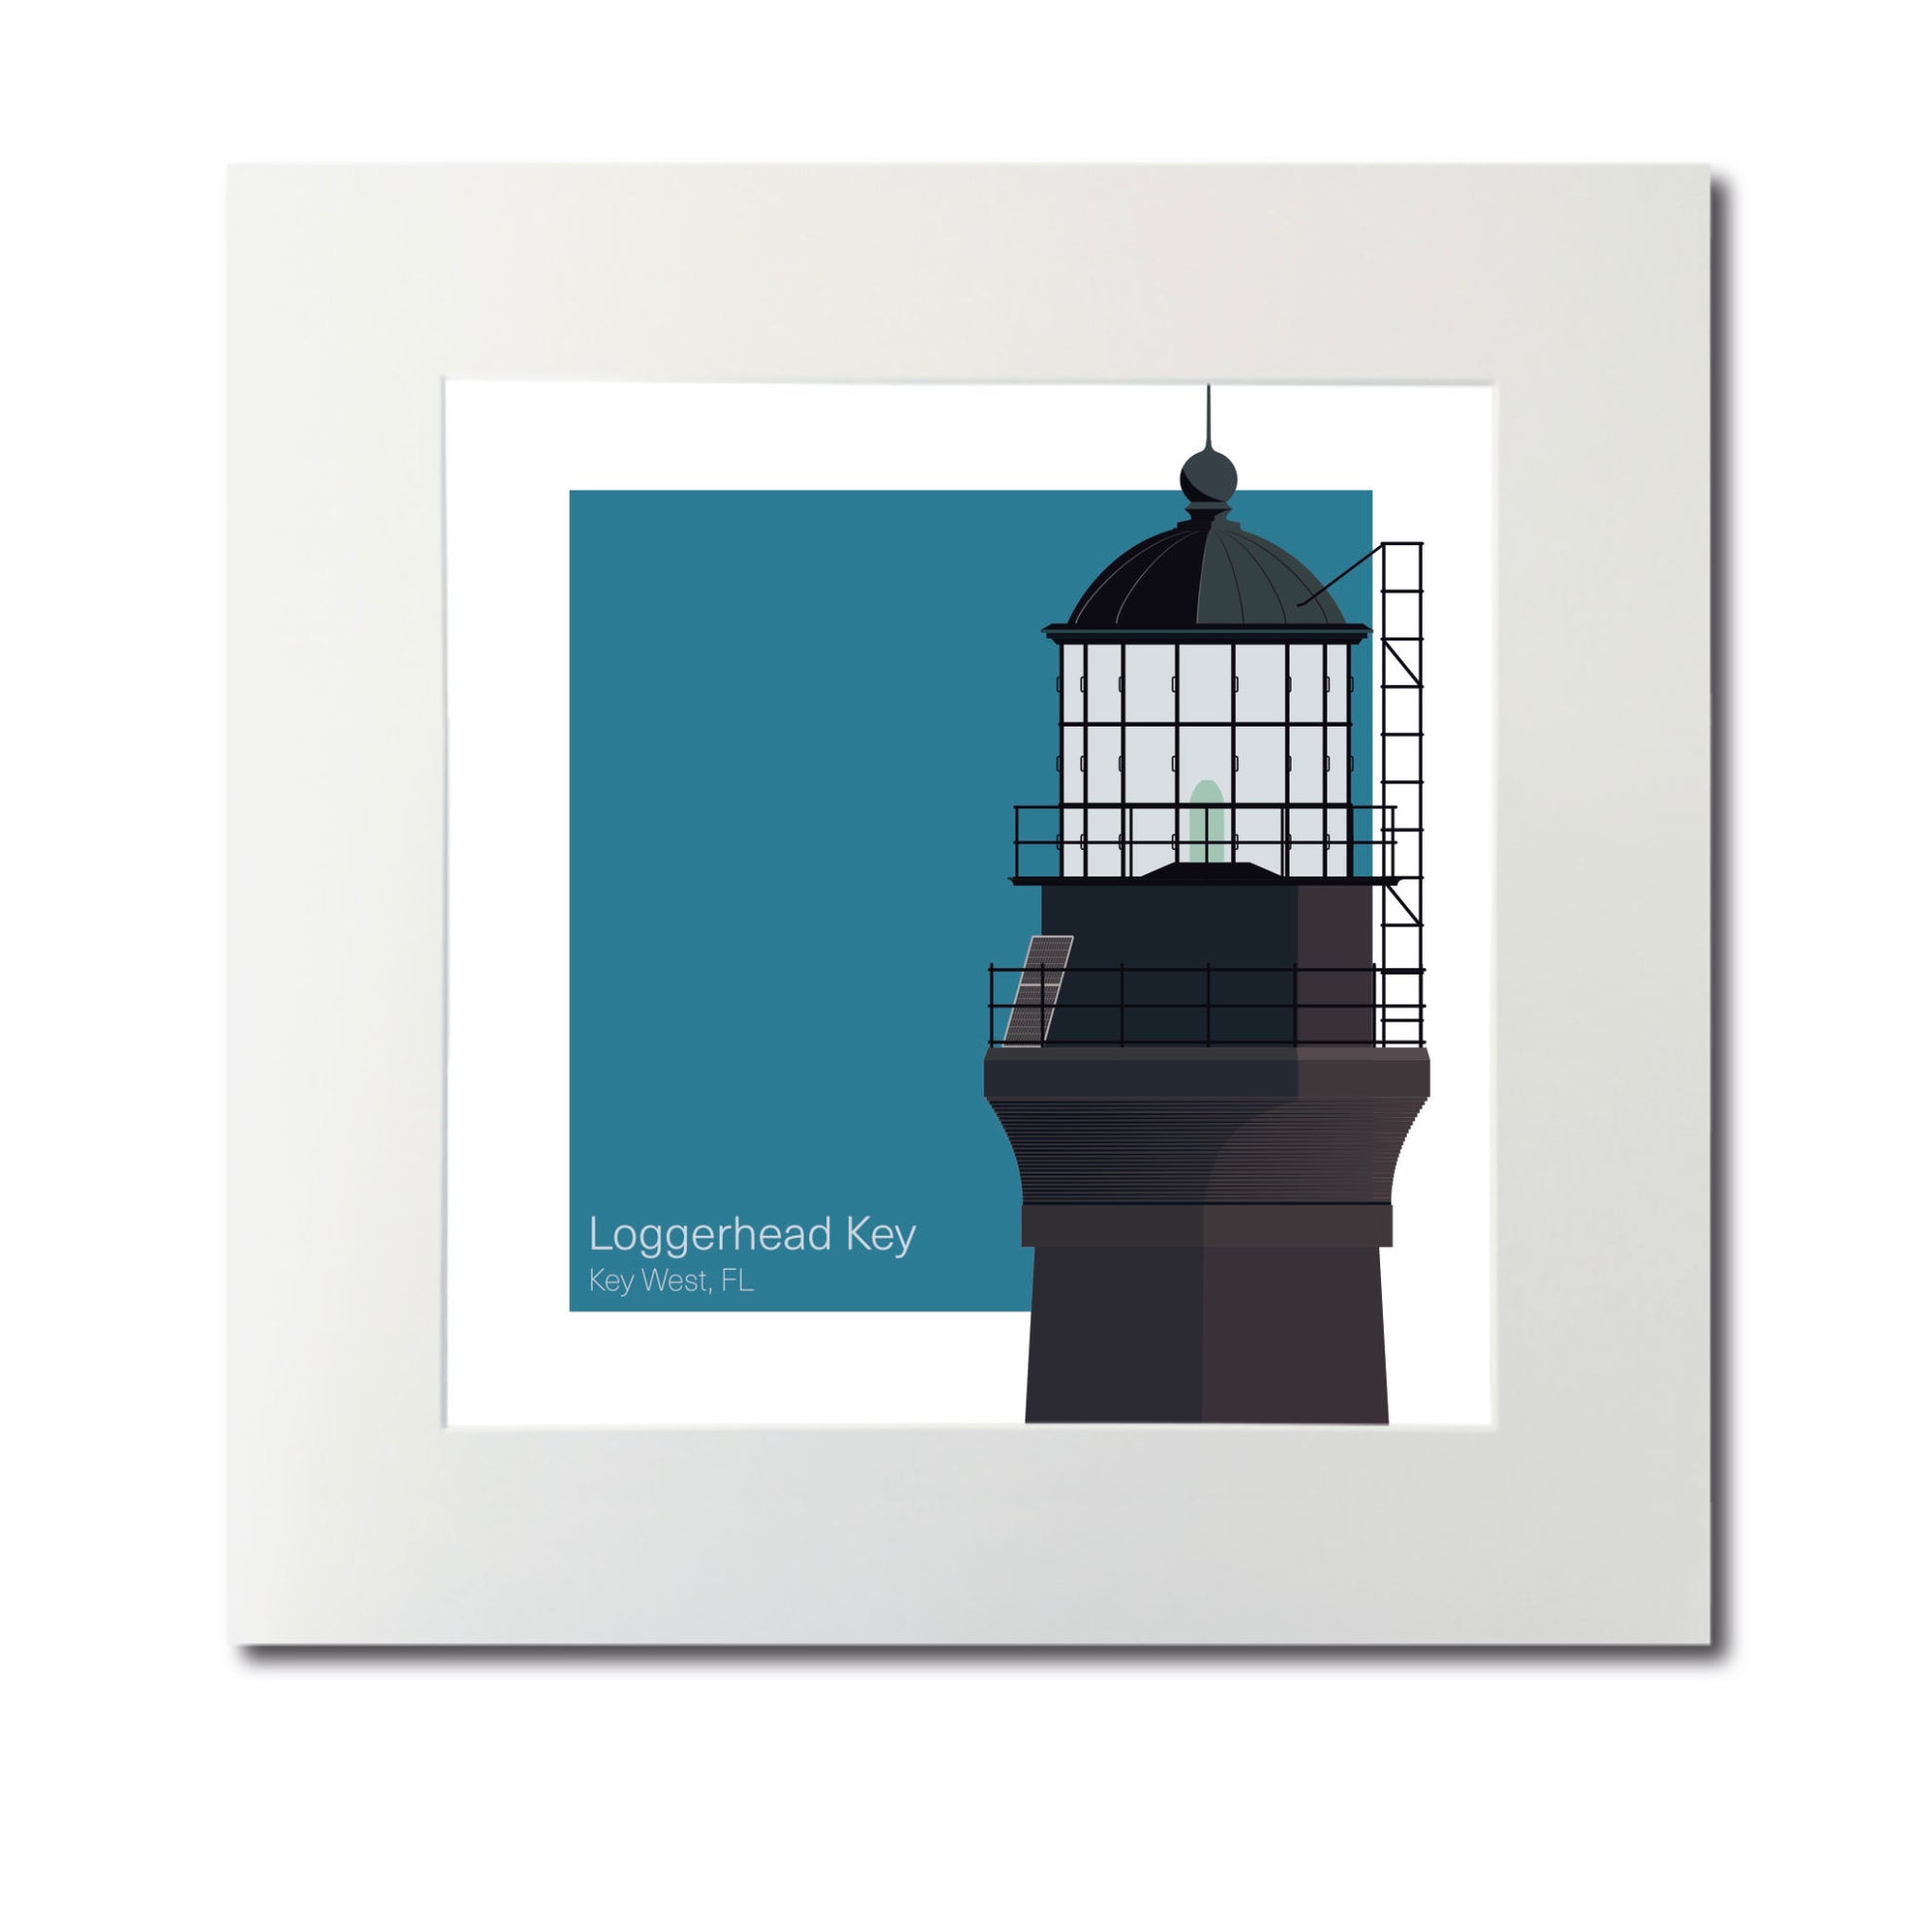 Illustration of the Loggerhead lighthouse, FL, USA. On a white background with aqua blue square as a backdrop., mounted and measuring 12"x12" (30x30cm).